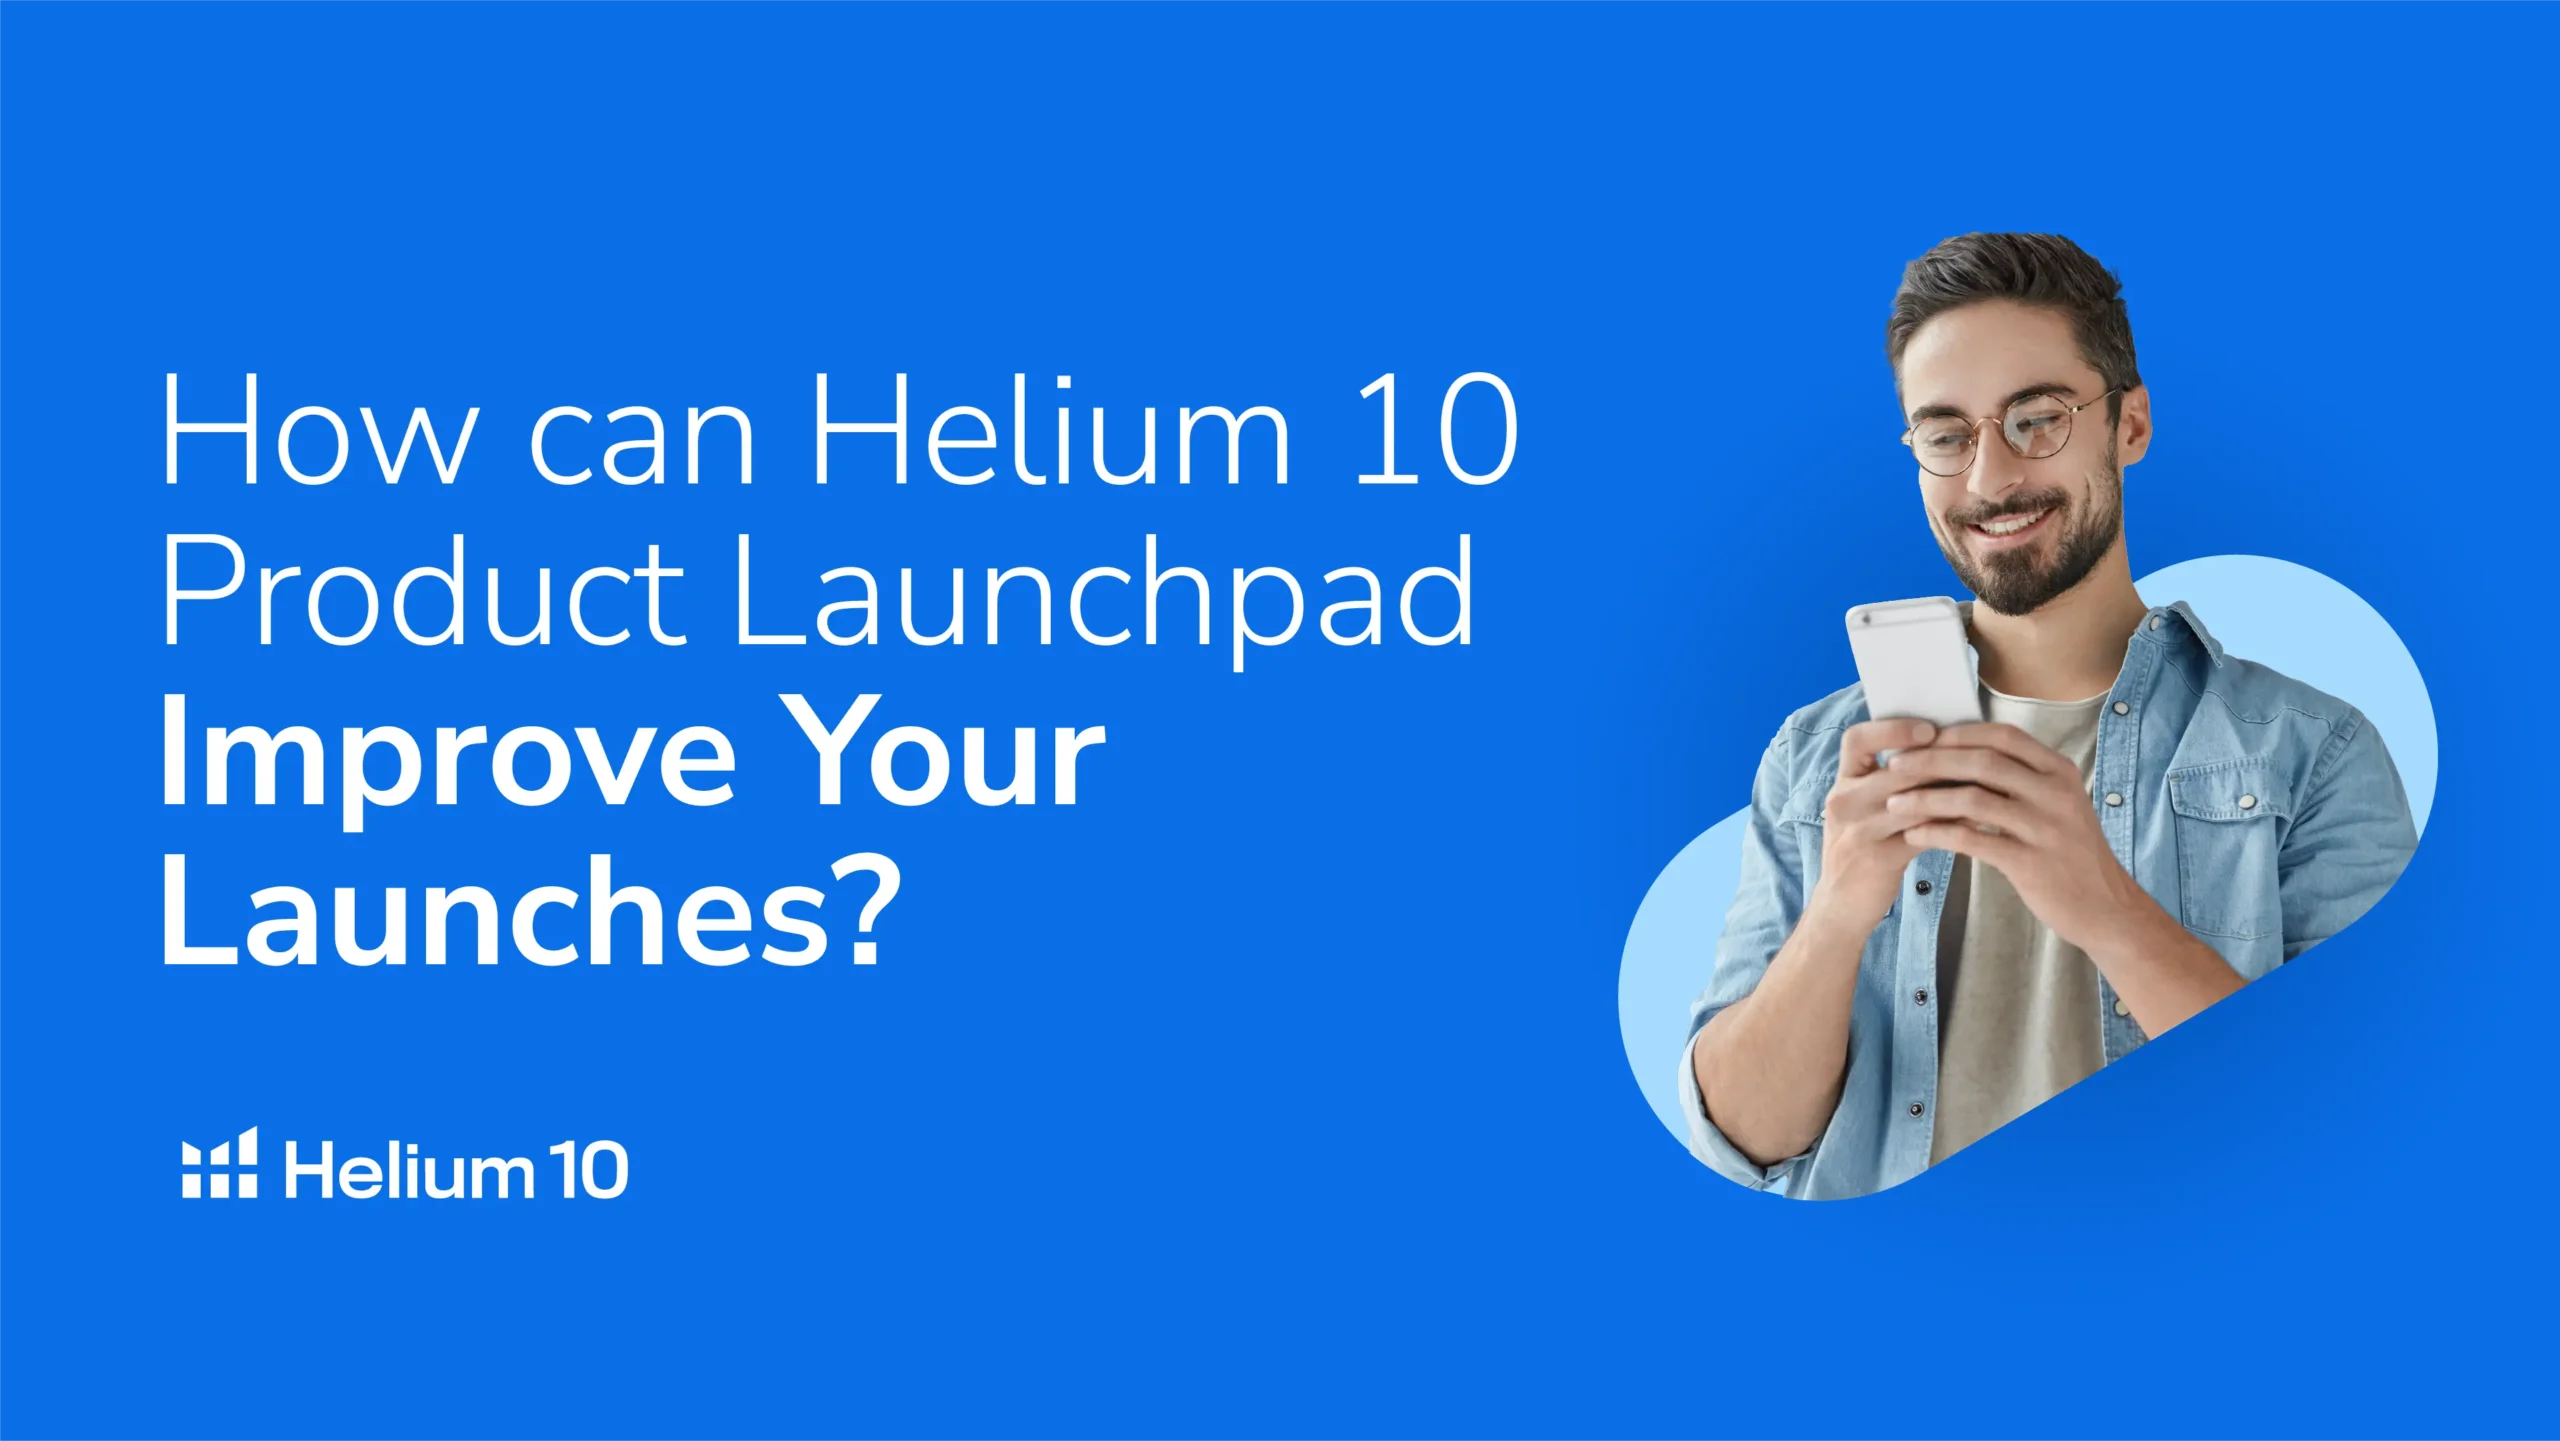 H10-Product-Launchpad